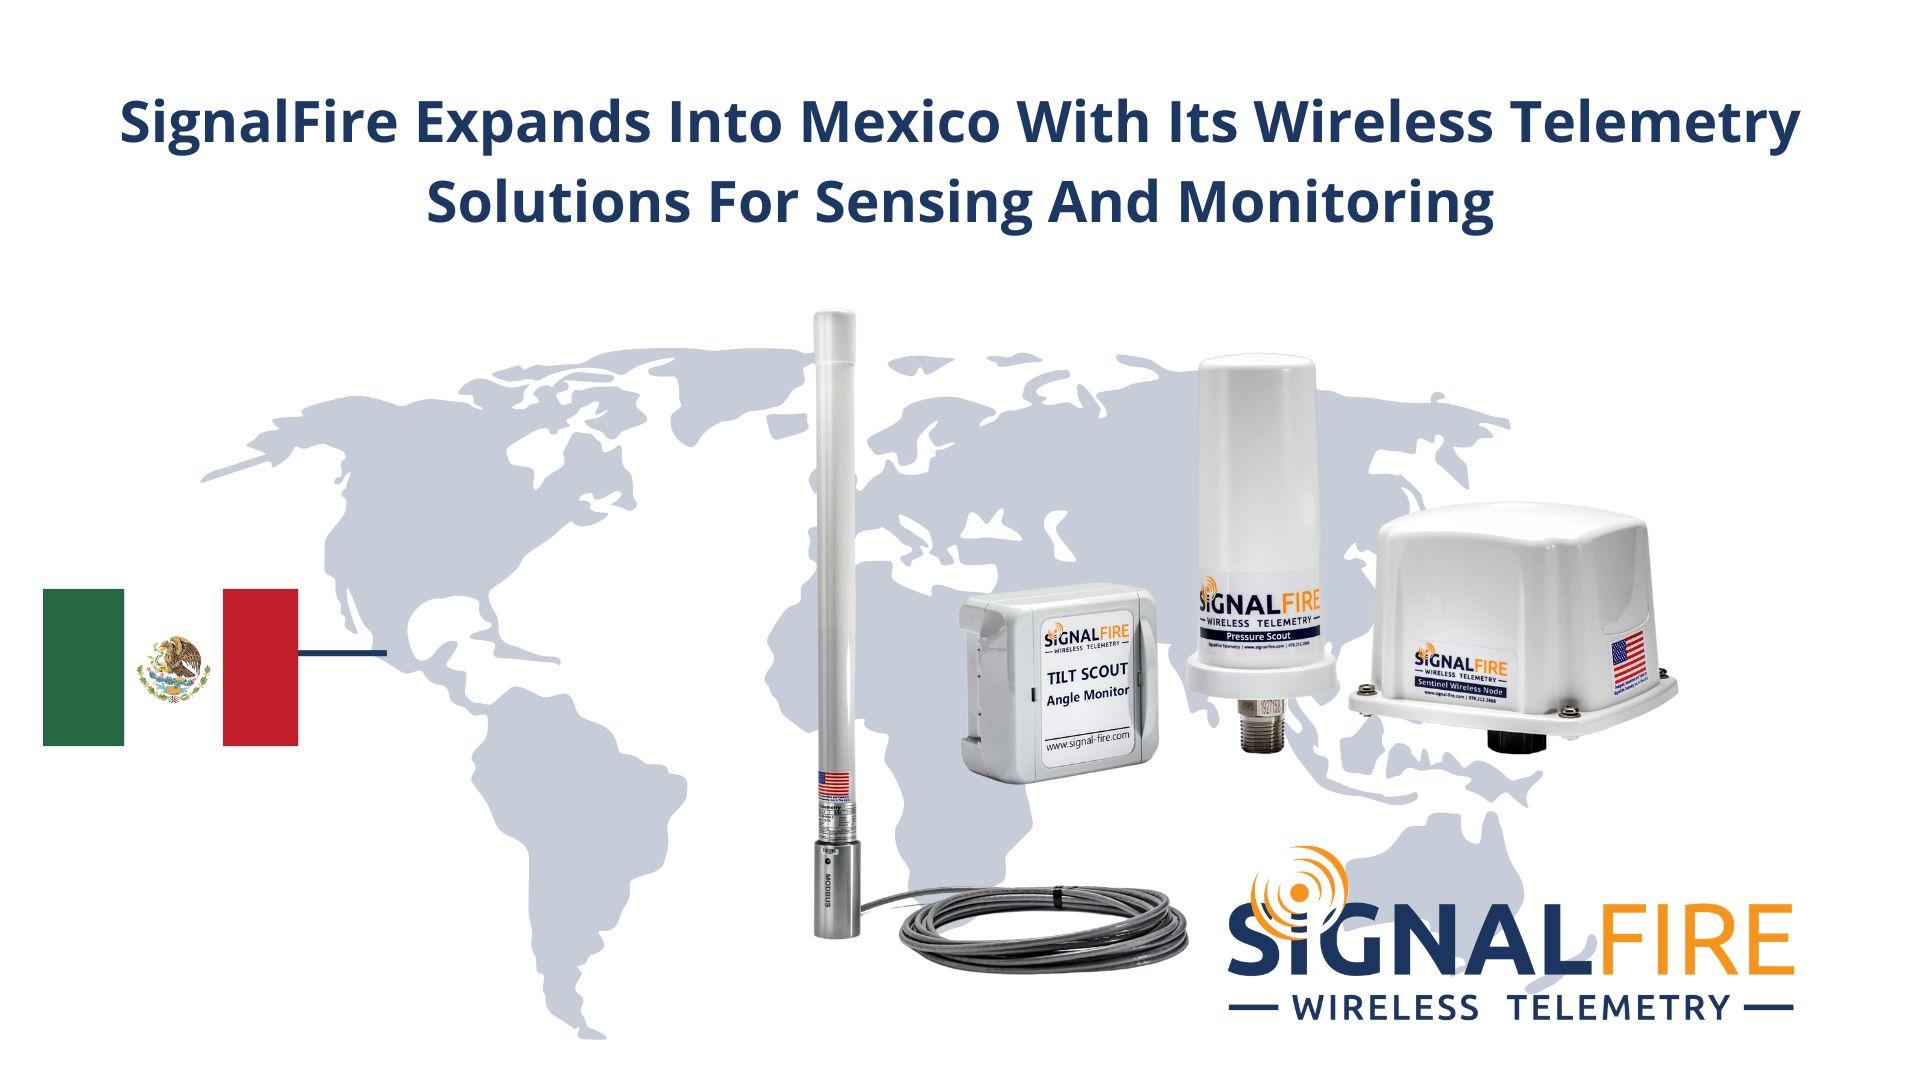 SignalFire Expands Into Mexico With Its Wireless Telemetry Solutions For Sensing And Monitoring